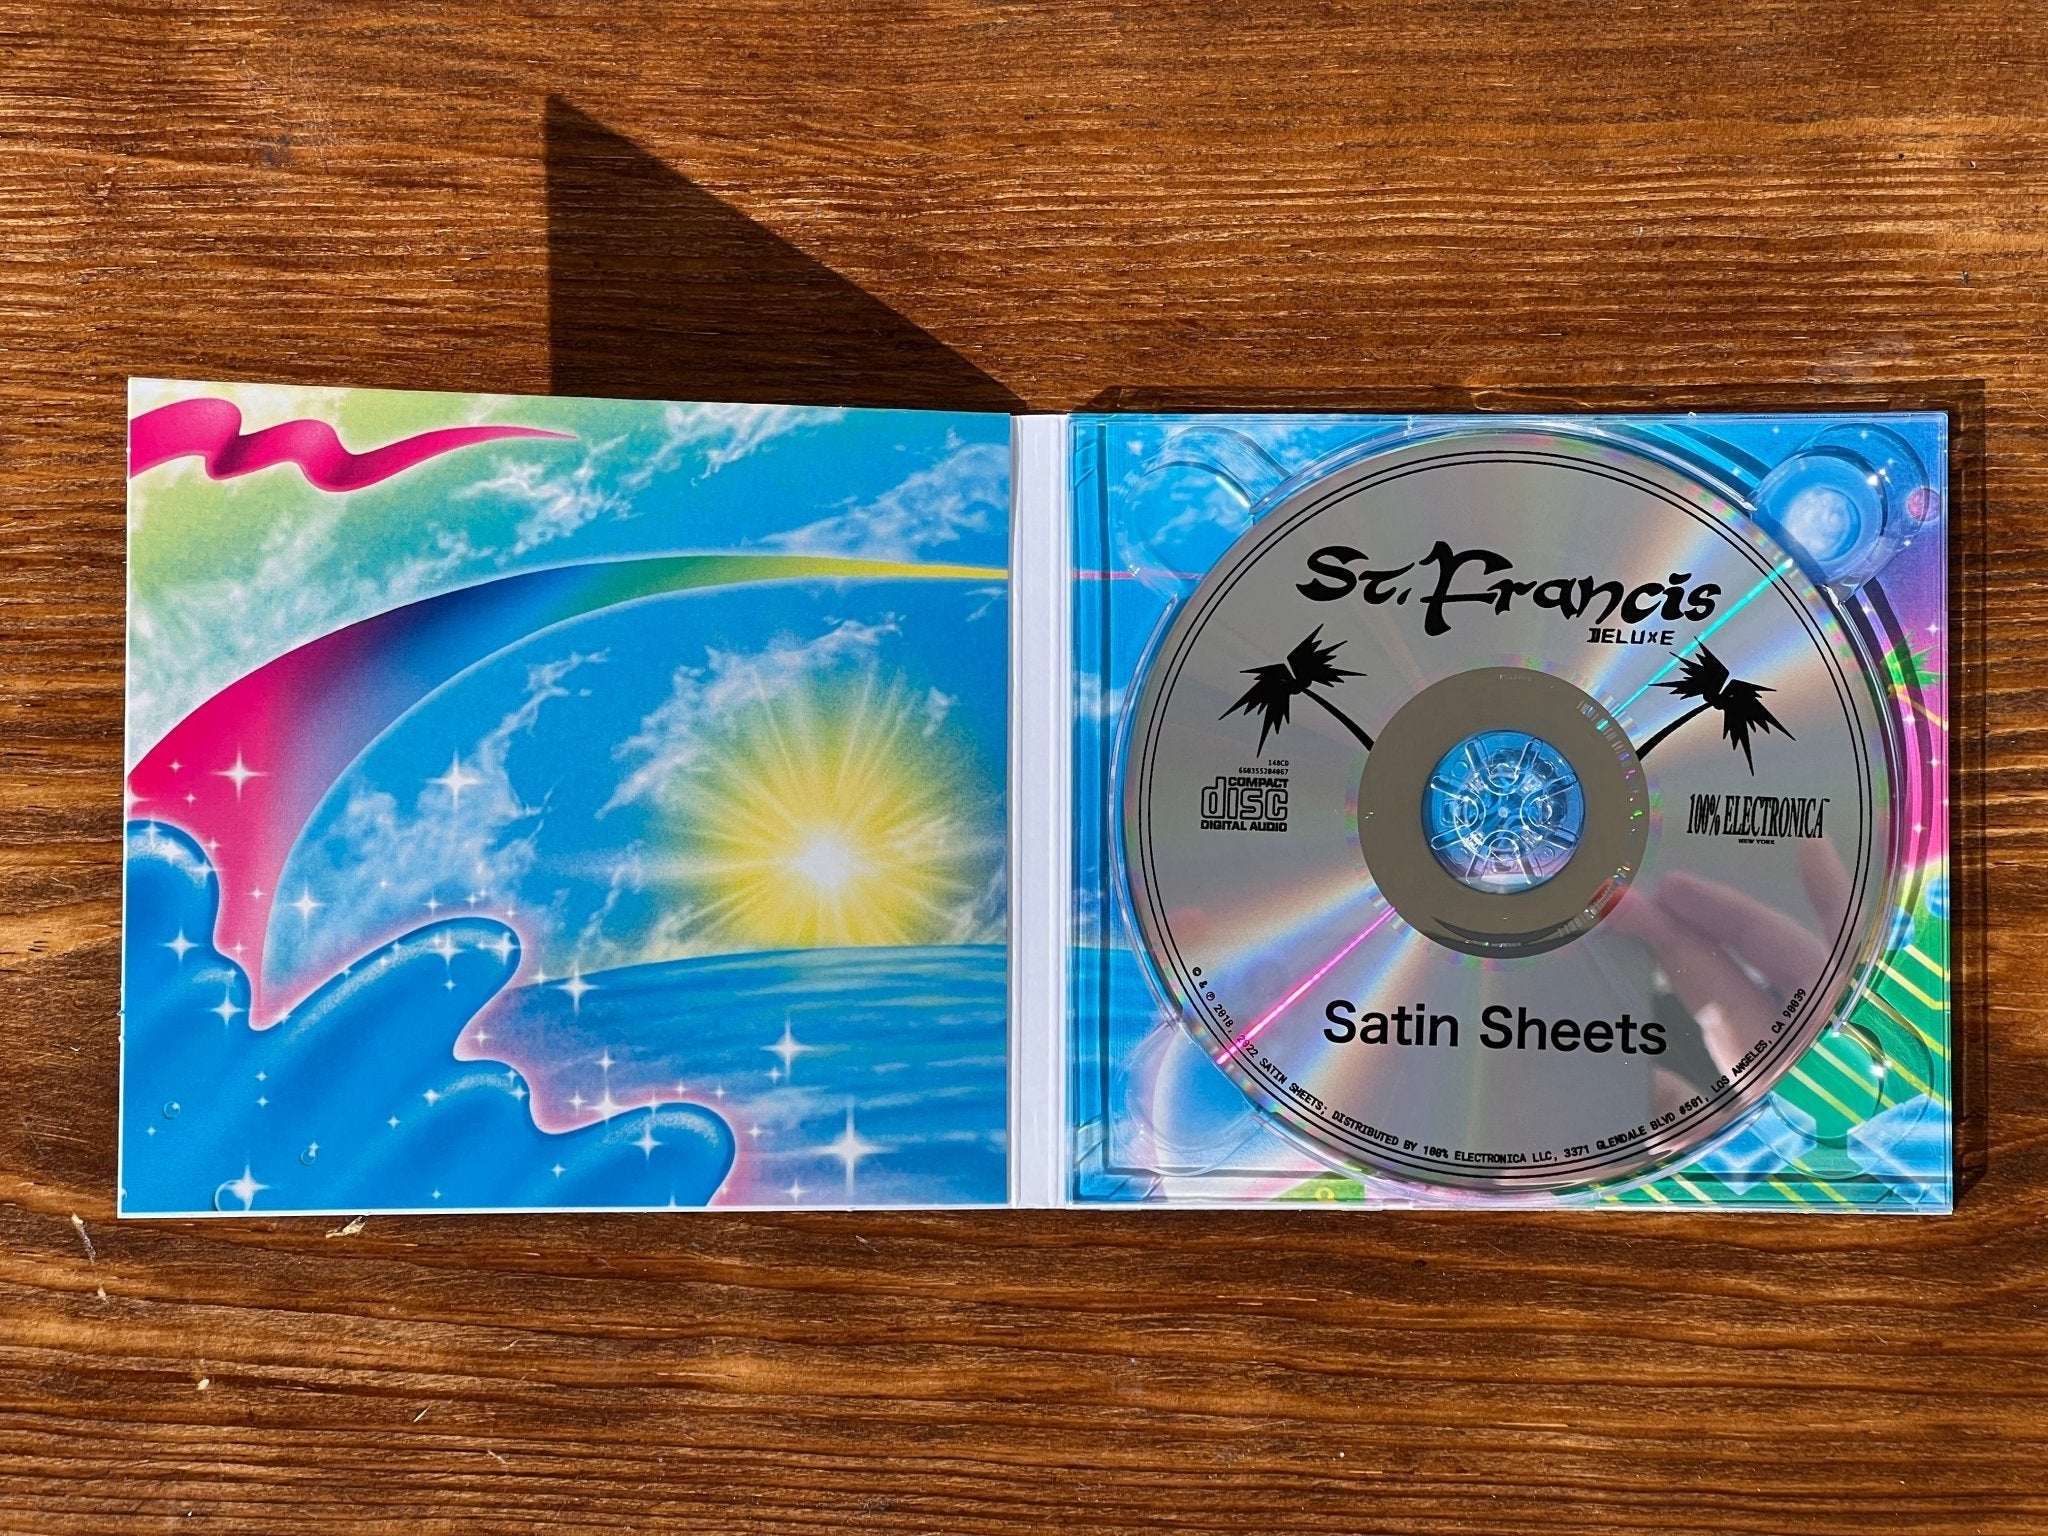 Satin Sheets - St. Francis Deluxe CD (St. Francis I + II) - 100% Electronica Official Store (Photo 5)